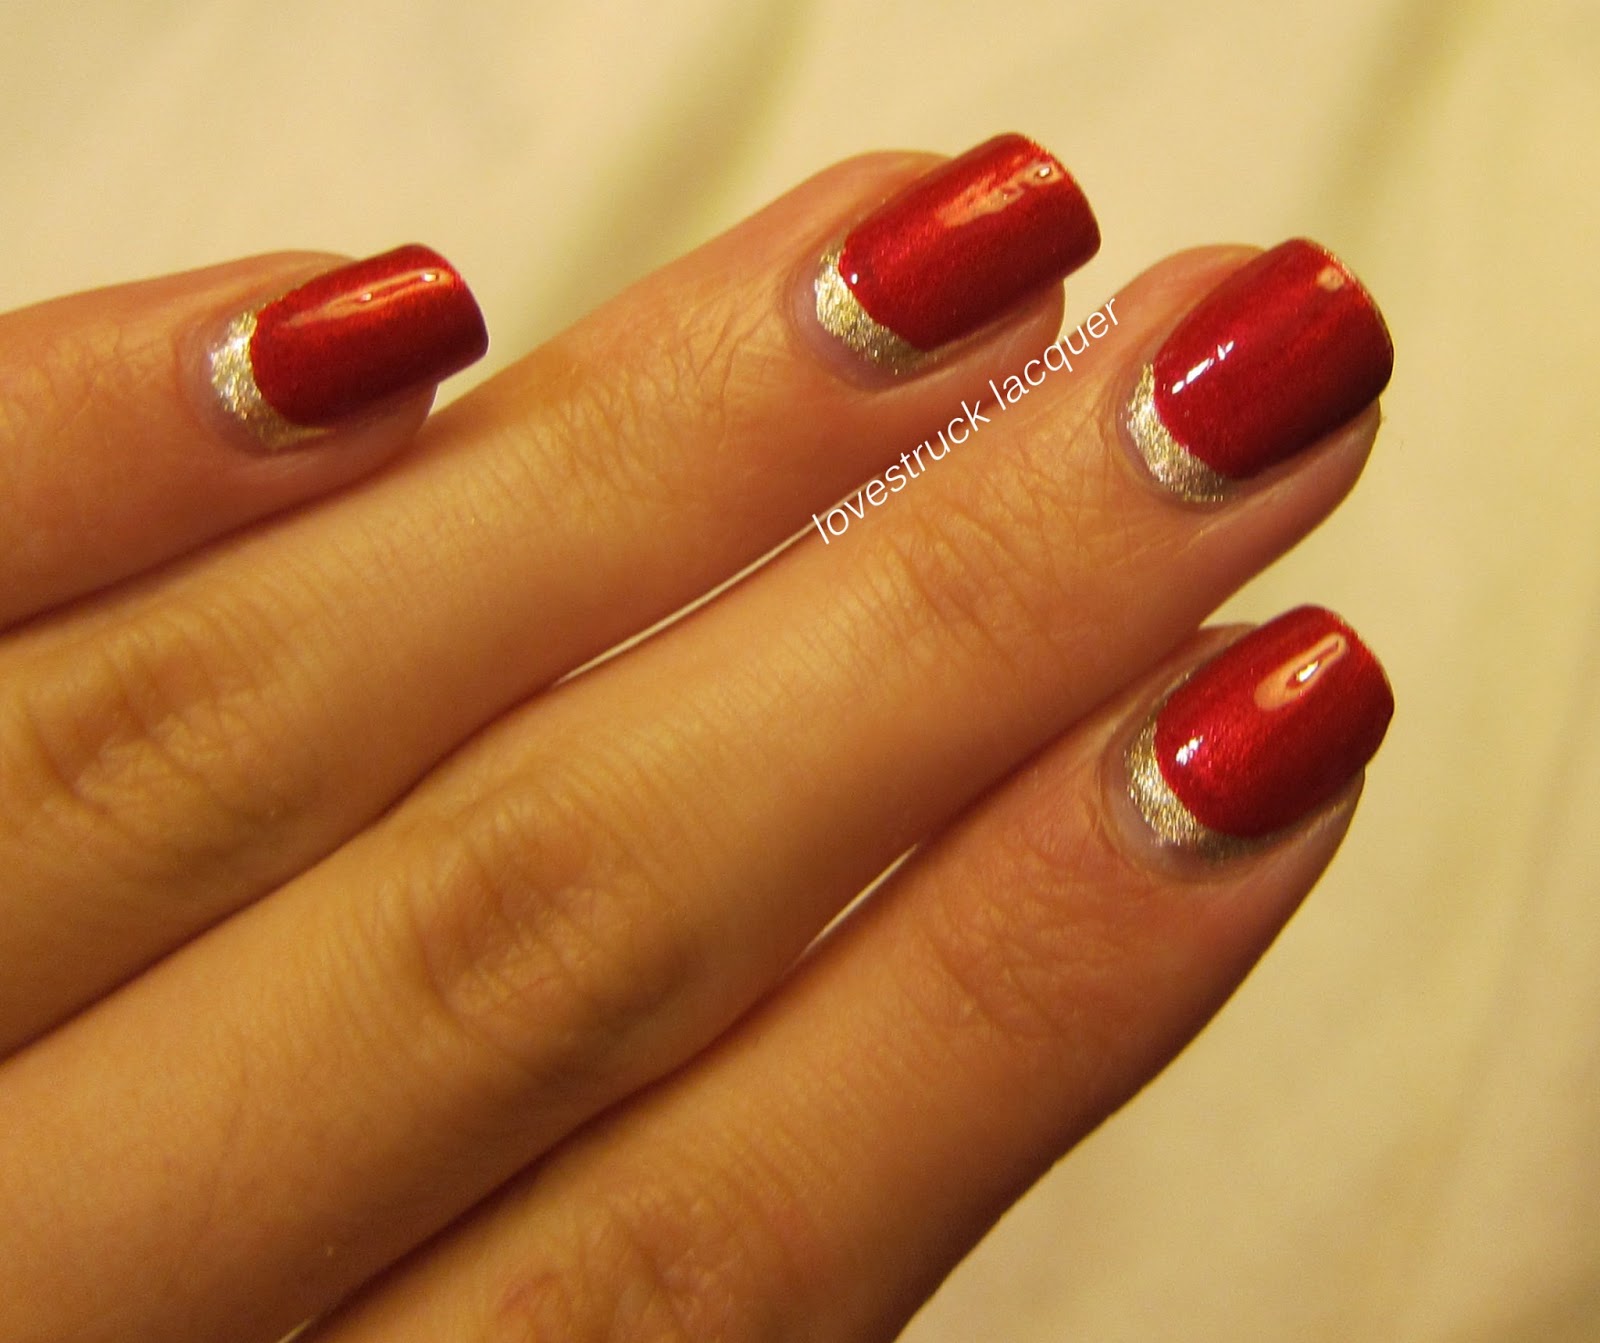 Lovestruck Lacquer: Chinese New Year Gold and Red Ruffian Mani